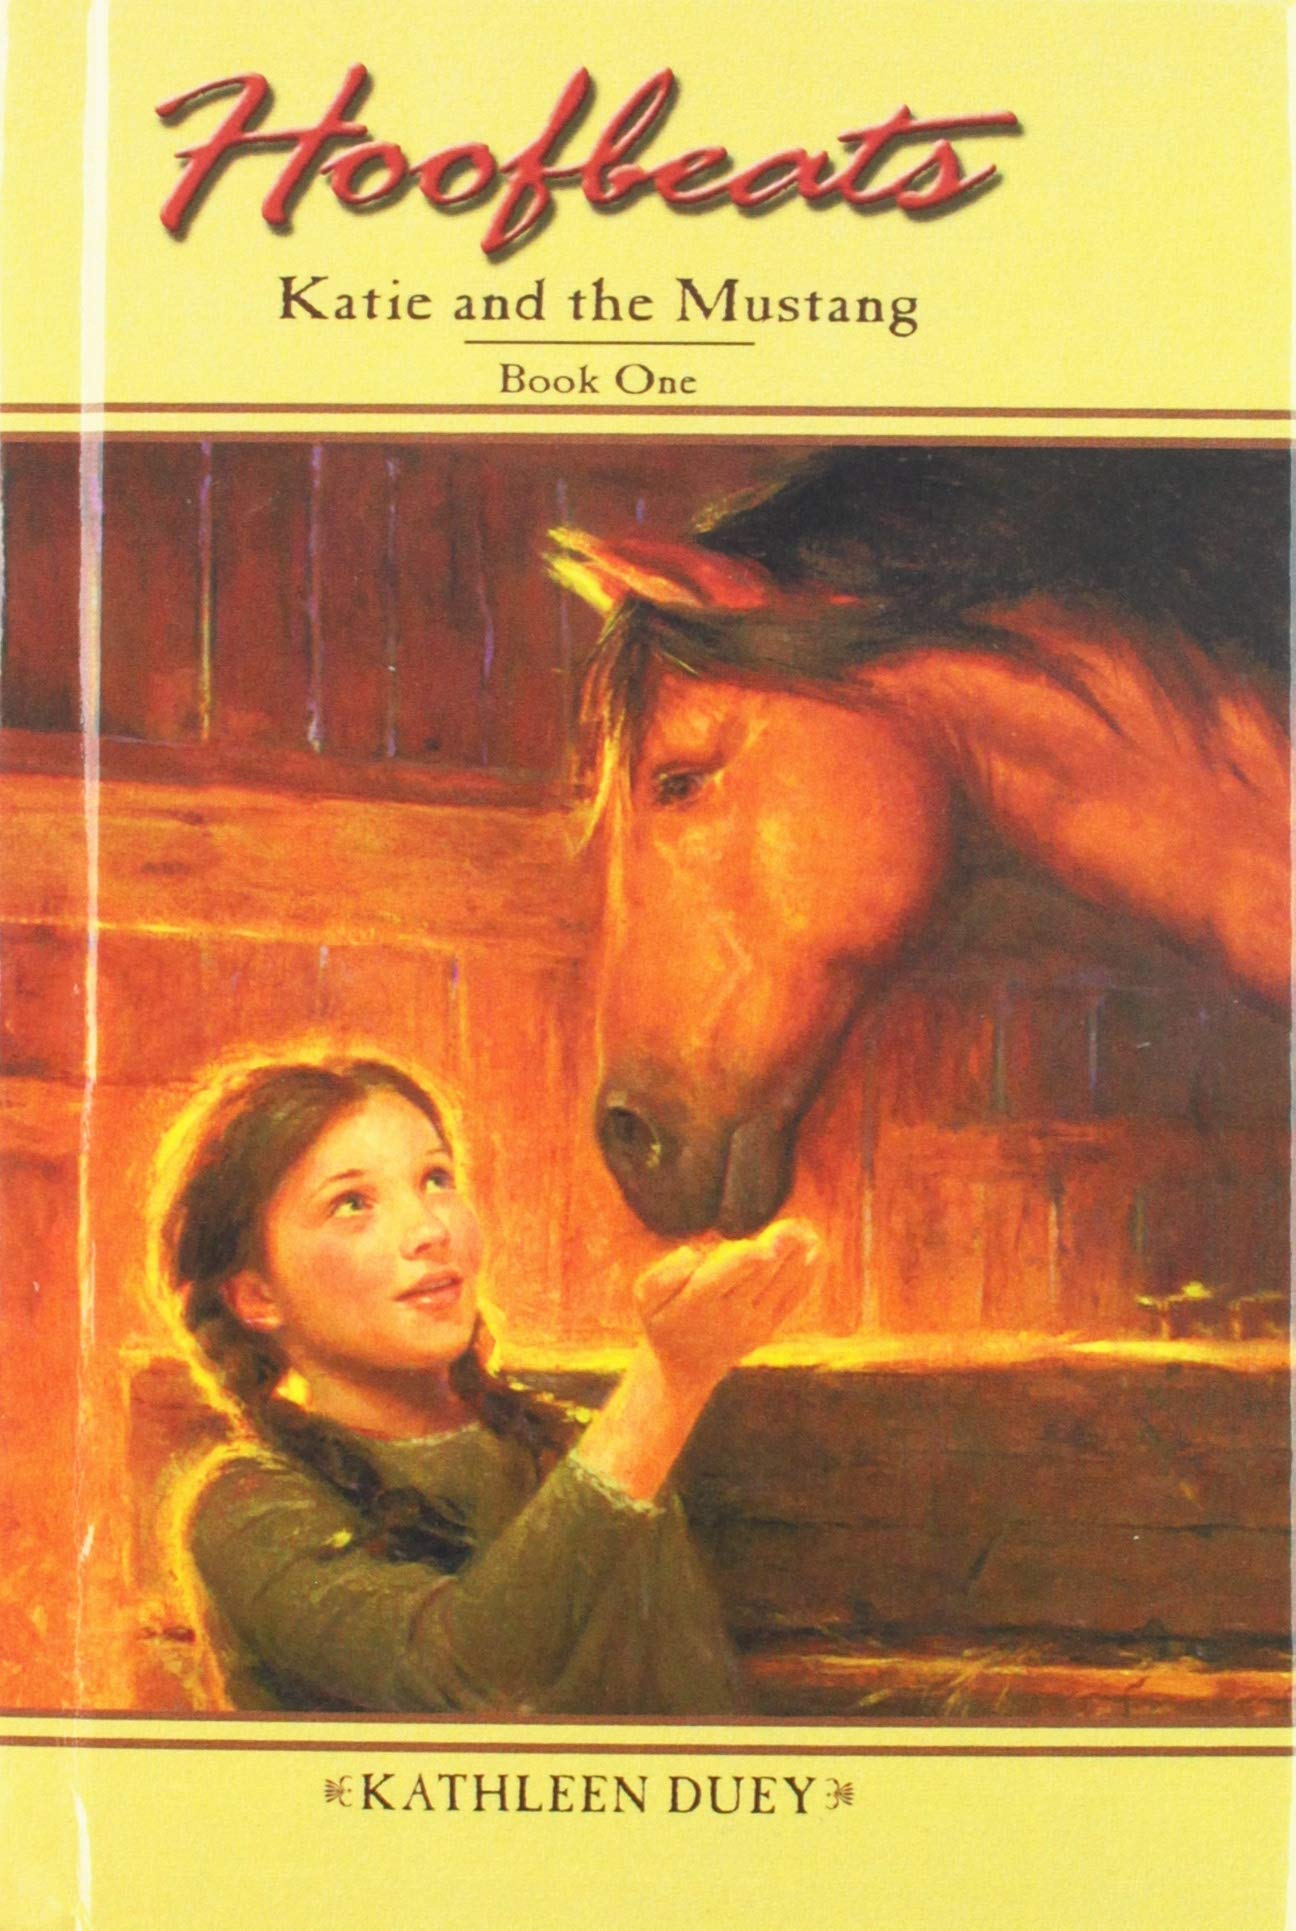 Katie and the Mustang, Book 1